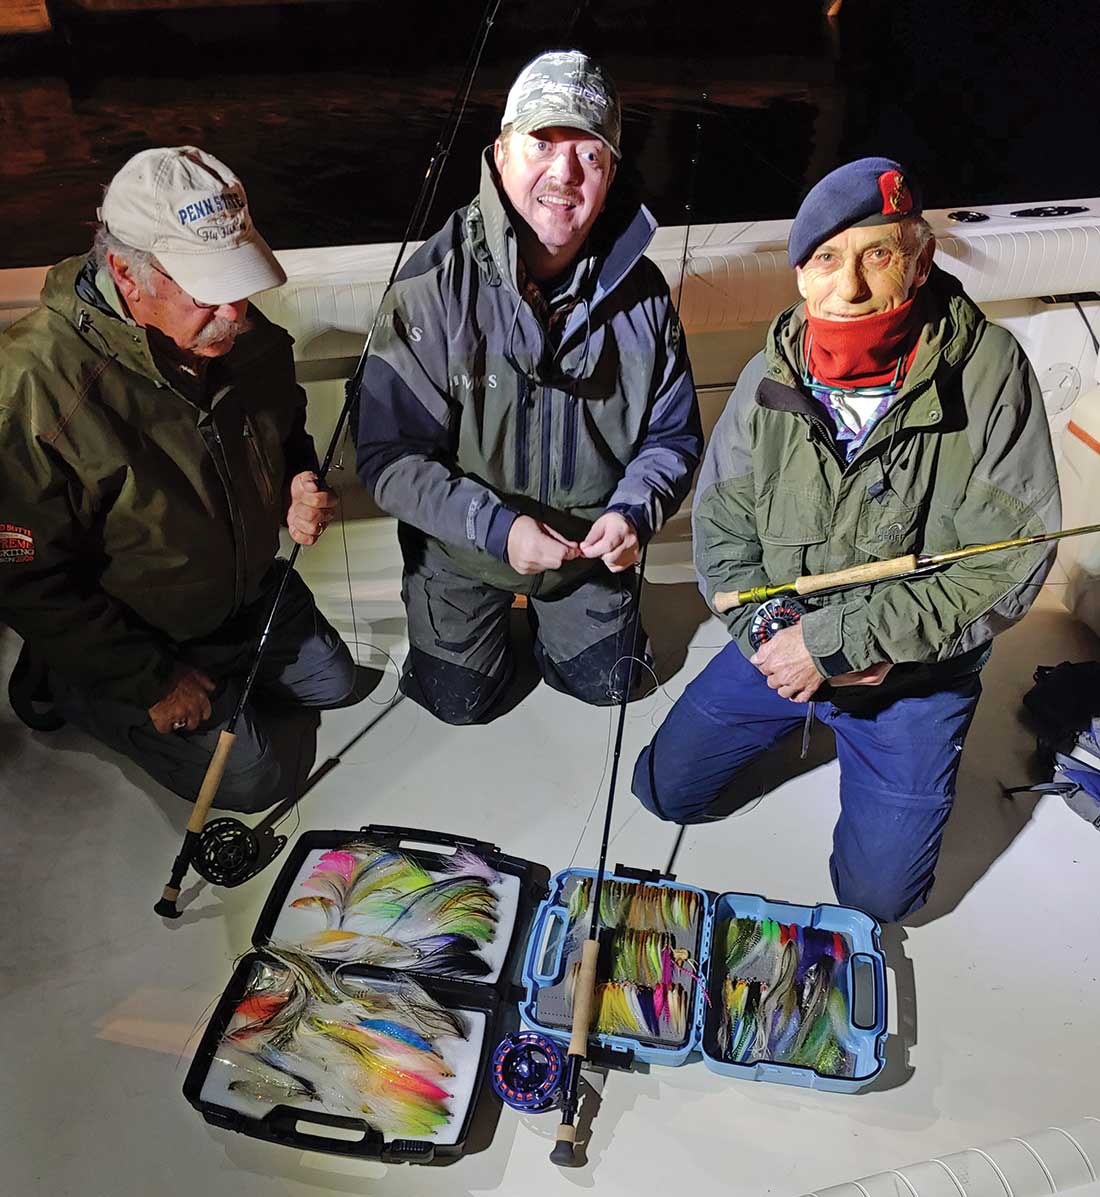 Chuck Furminsky of the Fly Fishing Show, Harry Schoel from Belgium, and Theo Bakelaar from the Netherlands getting ready selecting the right fly for the day onboard Shore Catch Sportfishing